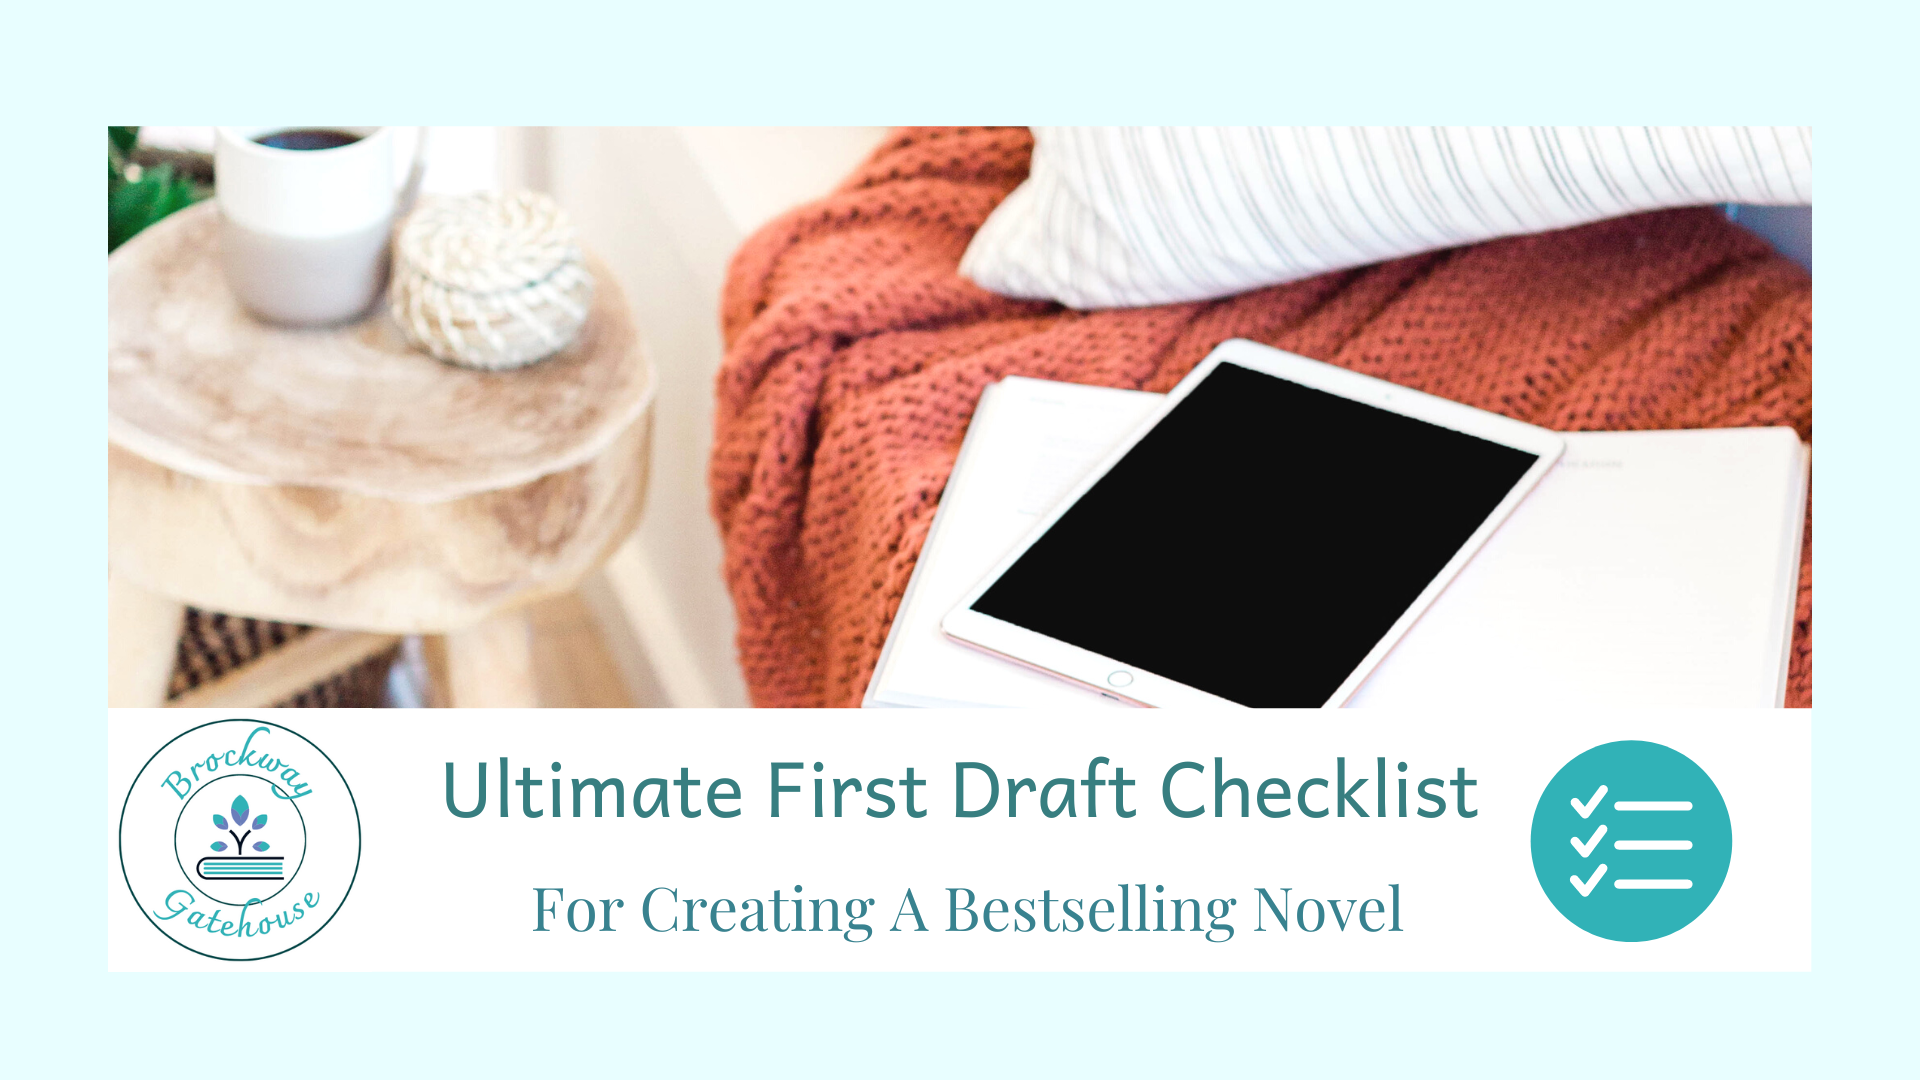 Ultimate First Draft Checklist: Secrets to Bestseller Success